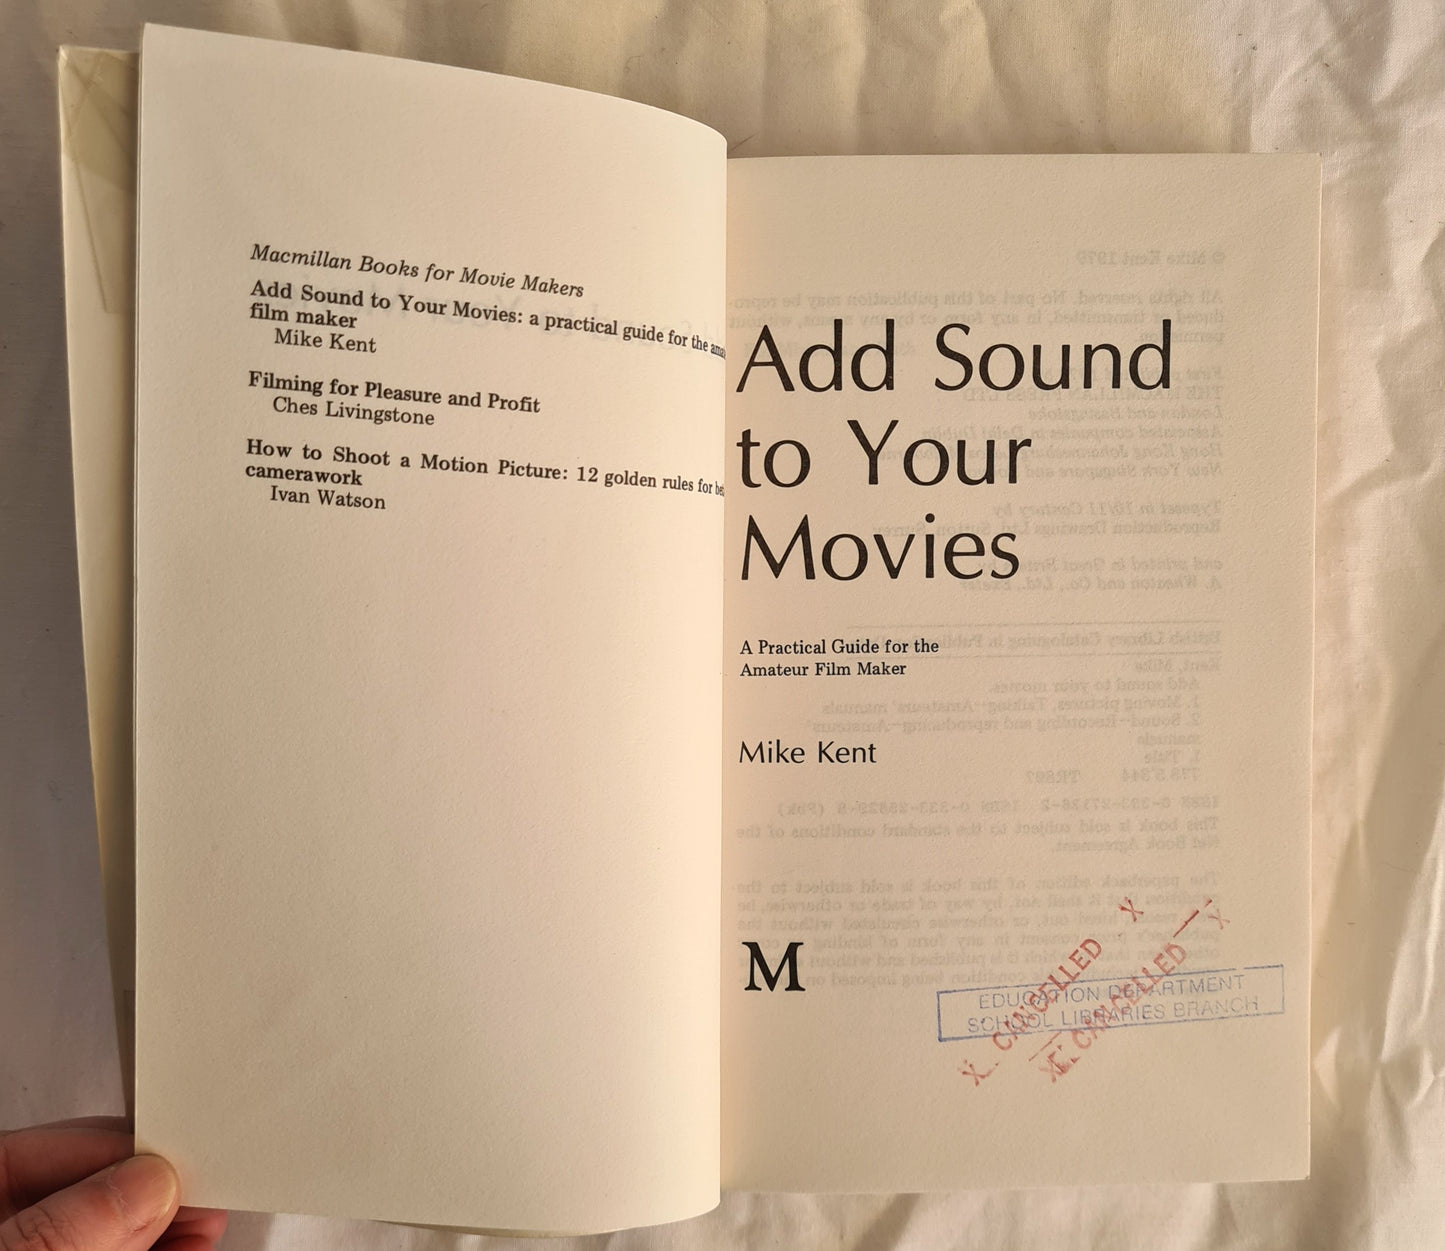 Add Sound to Yor Moves by Mike Kent